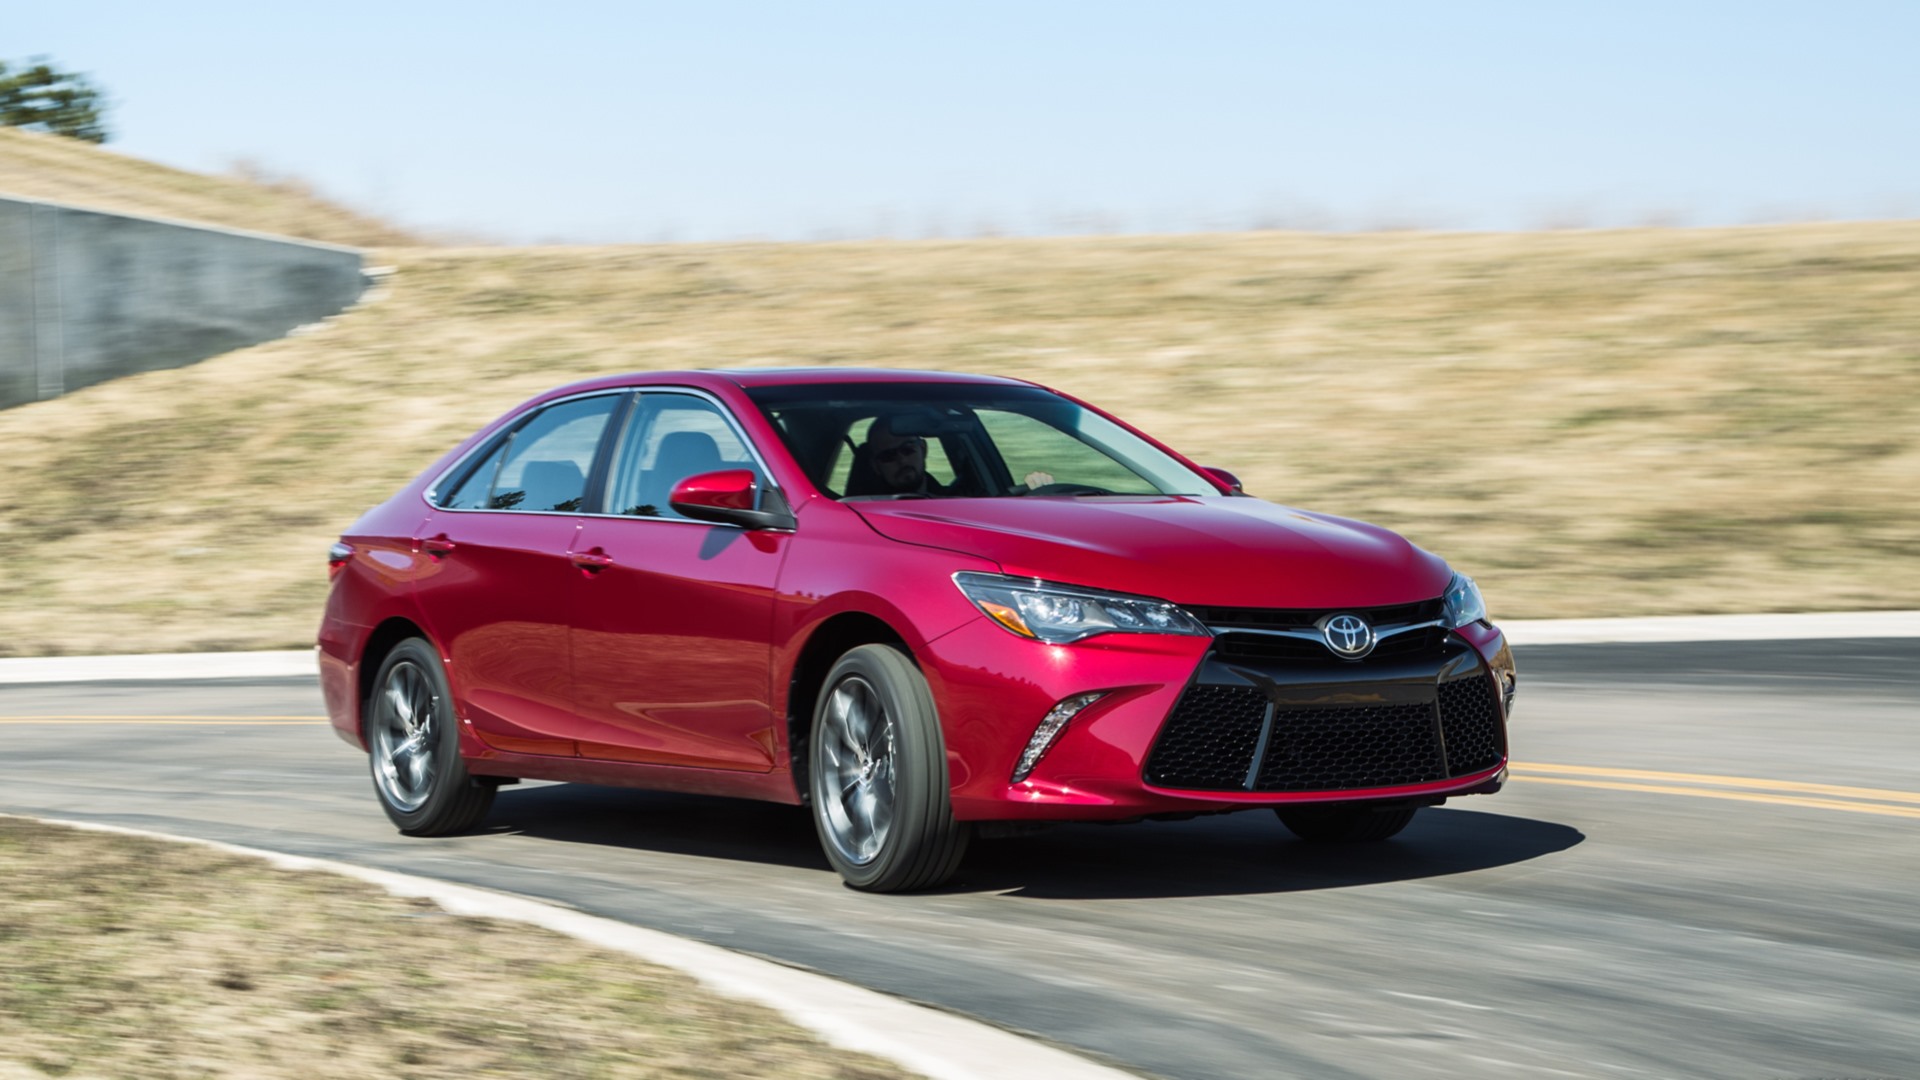 Vehicles 2015 Toyota Camry HD Wallpaper | Background Image